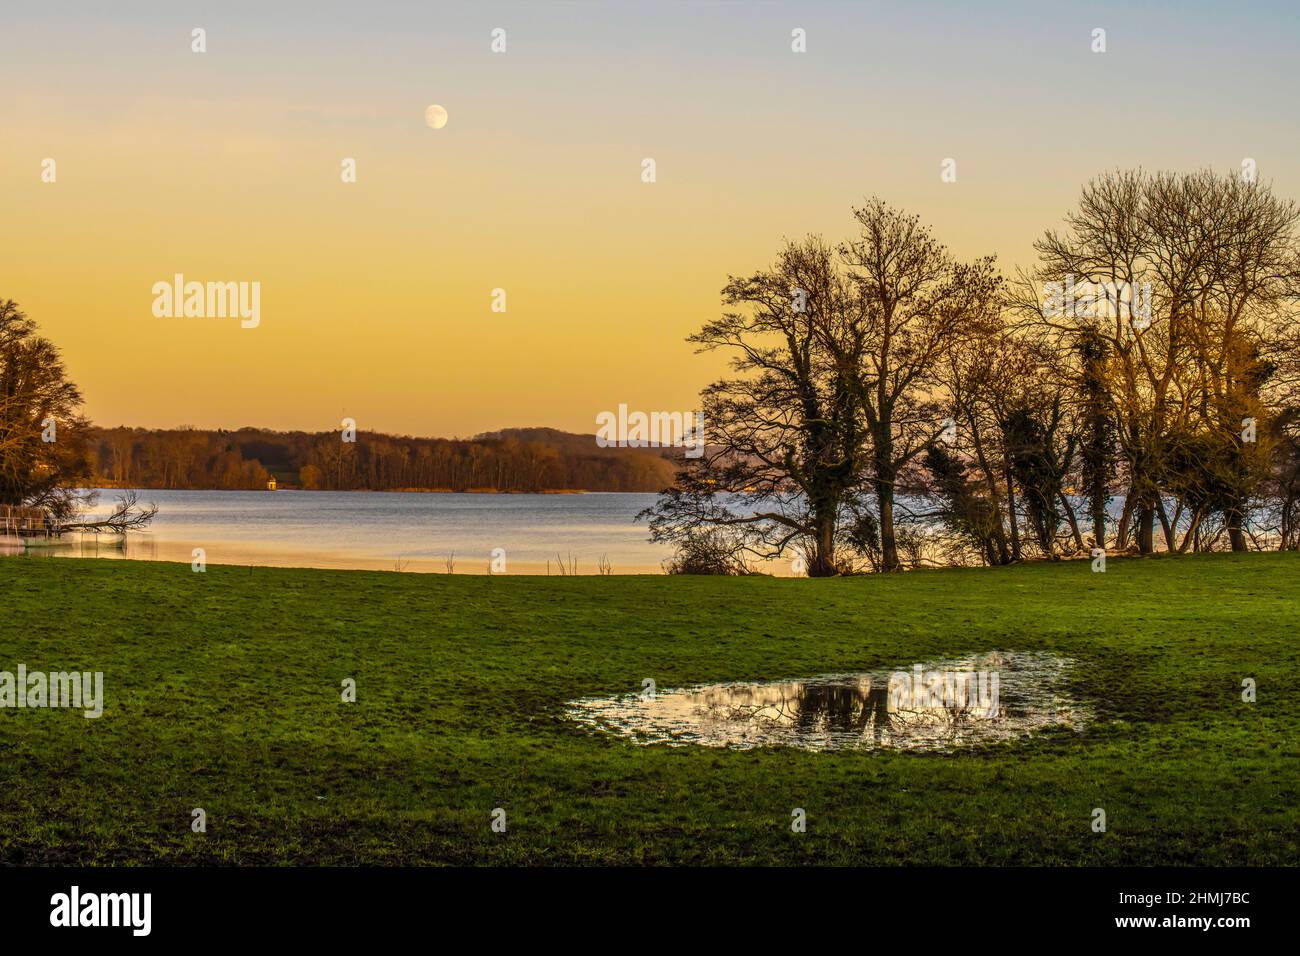 Winter late afternoon at Kellersee, Malente, Germany. Stock Photo